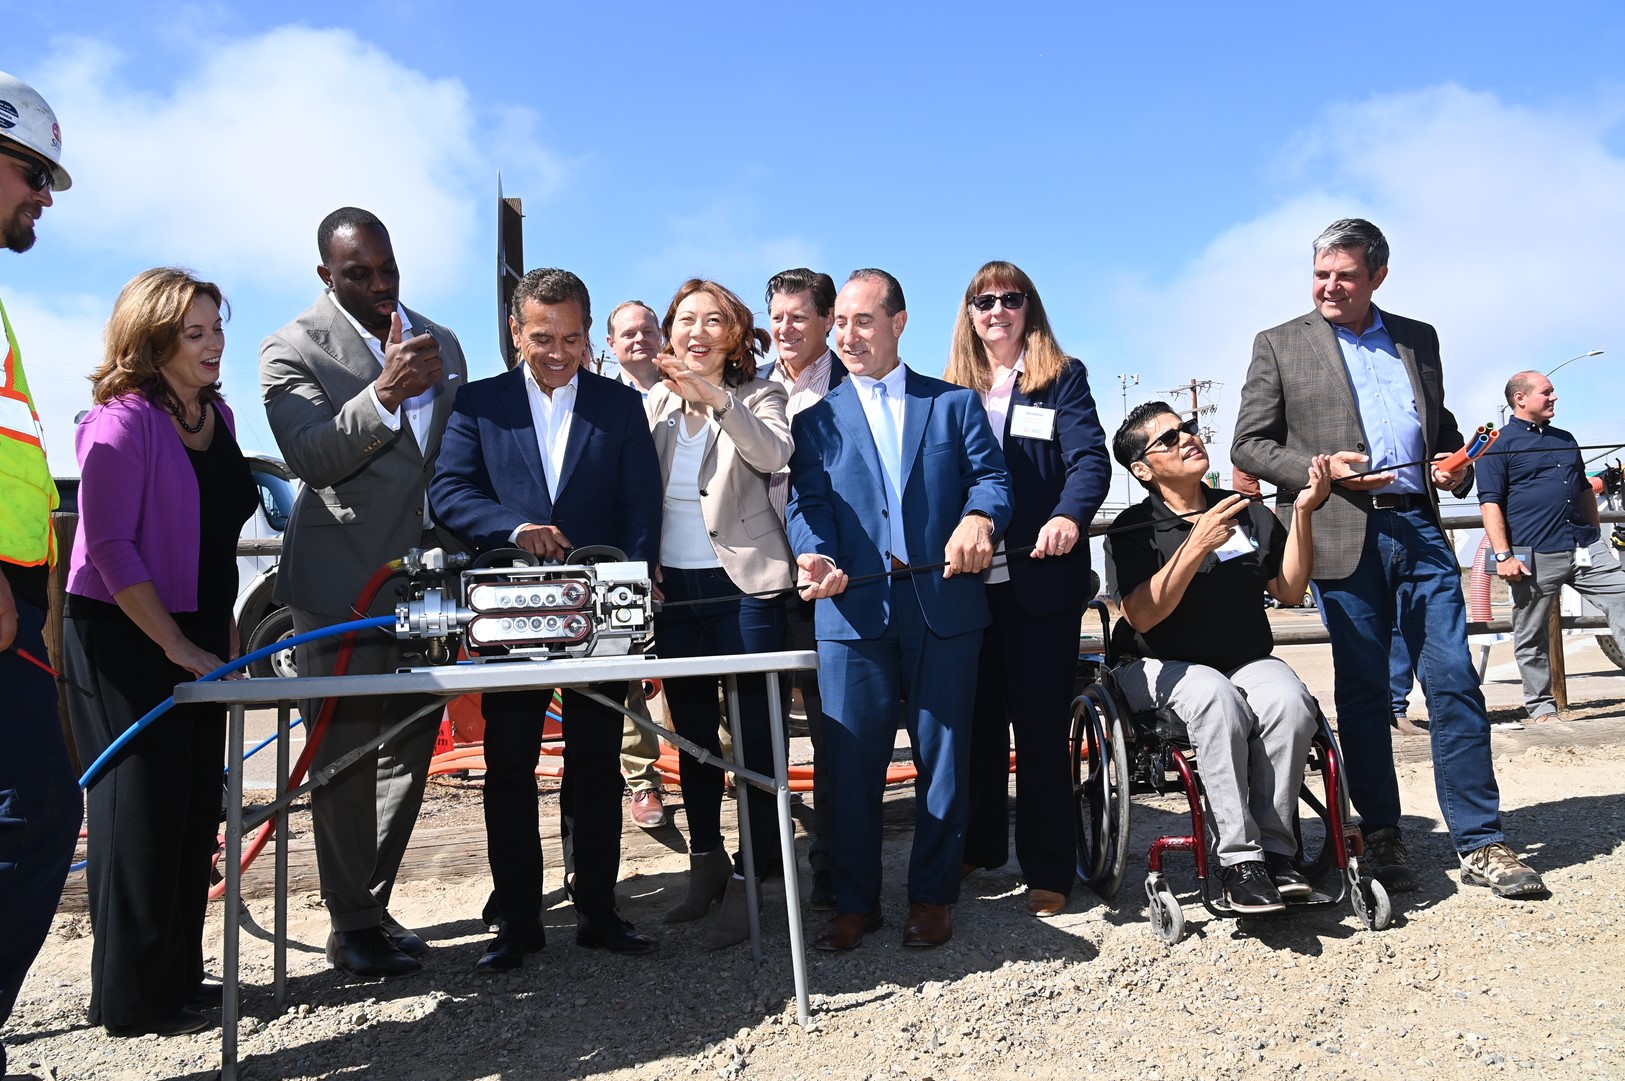 A group photo of people, including California leaders such as California Transportation Secretary Toks Omishakin and Caltrans Director Tony Tavares, watch former Los Angeles Mayor Antonio Villaraigosa kick off the start of construction by flipping a switch to insert the first fiber cable into the ground, representing the first of 10,000 miles of high-speed broadband internet that will be integrated into California's infrastructure.